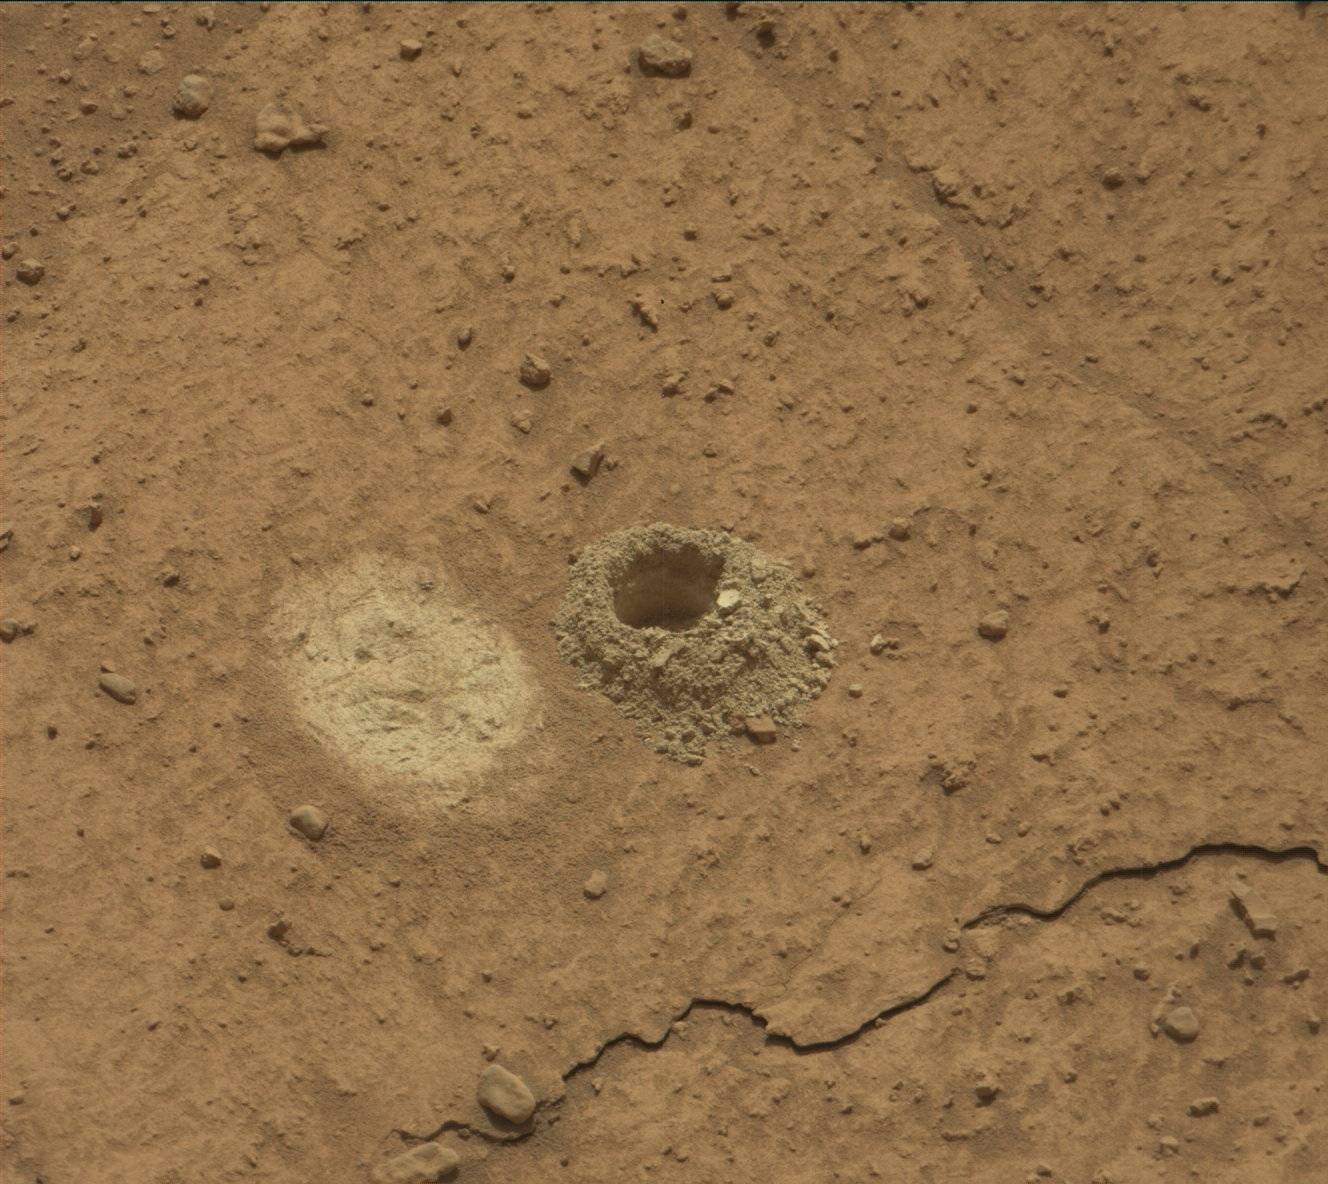 There are more than 40 holes on Mars. The drill aboard the Curiosity rover created the hole in a rock investigators call Mammoth Lakes. The bright spot to the left of the hole is where the rover smoothed a small area to collect spectroscopic data. Credit: NASA/JPL-Caltech/MSSS